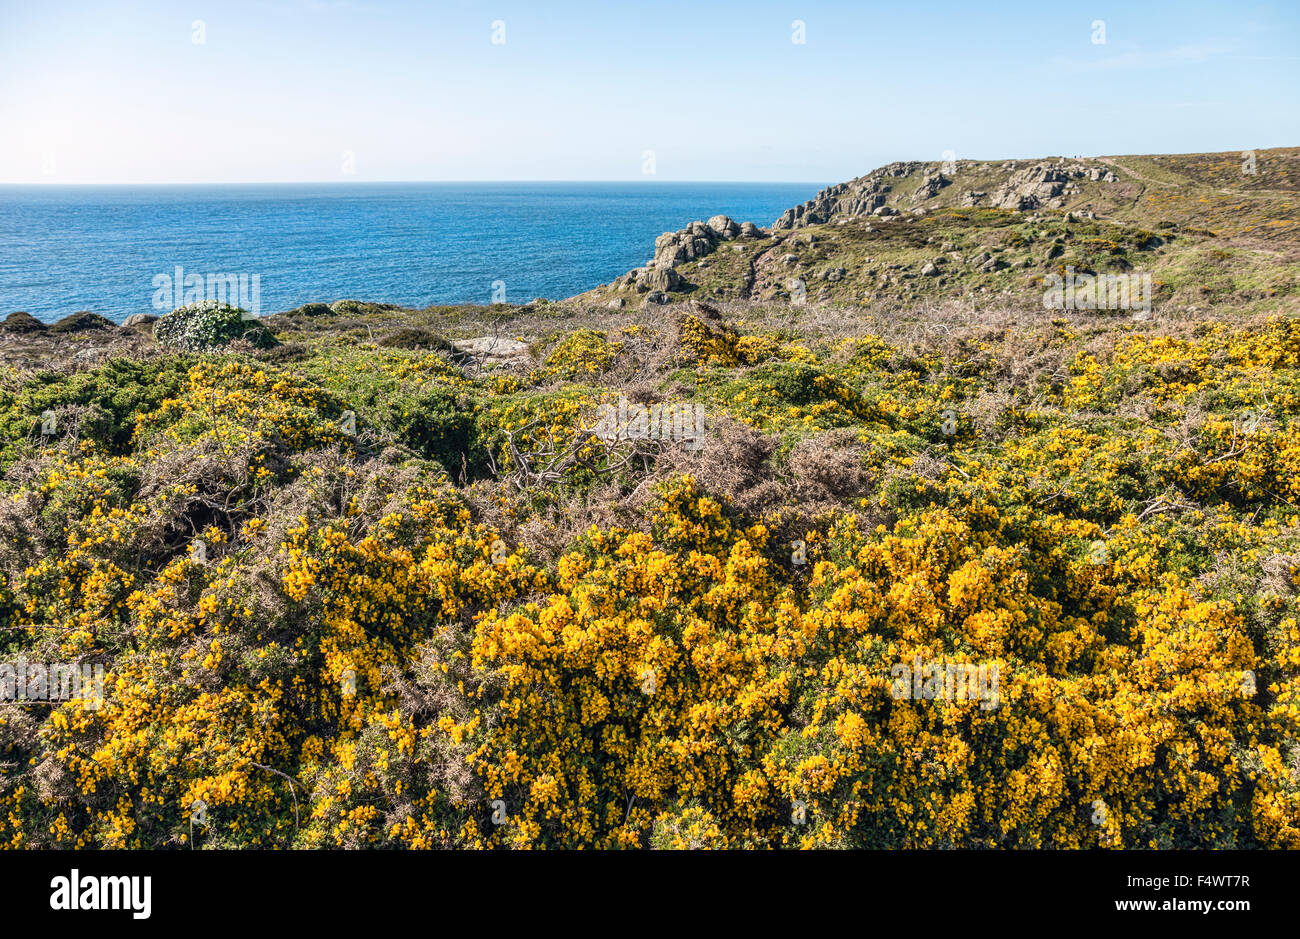 Yellow Gorse flower in a scenic coastal landscape at Lands End, Cornwall, England, UK Stock Photo